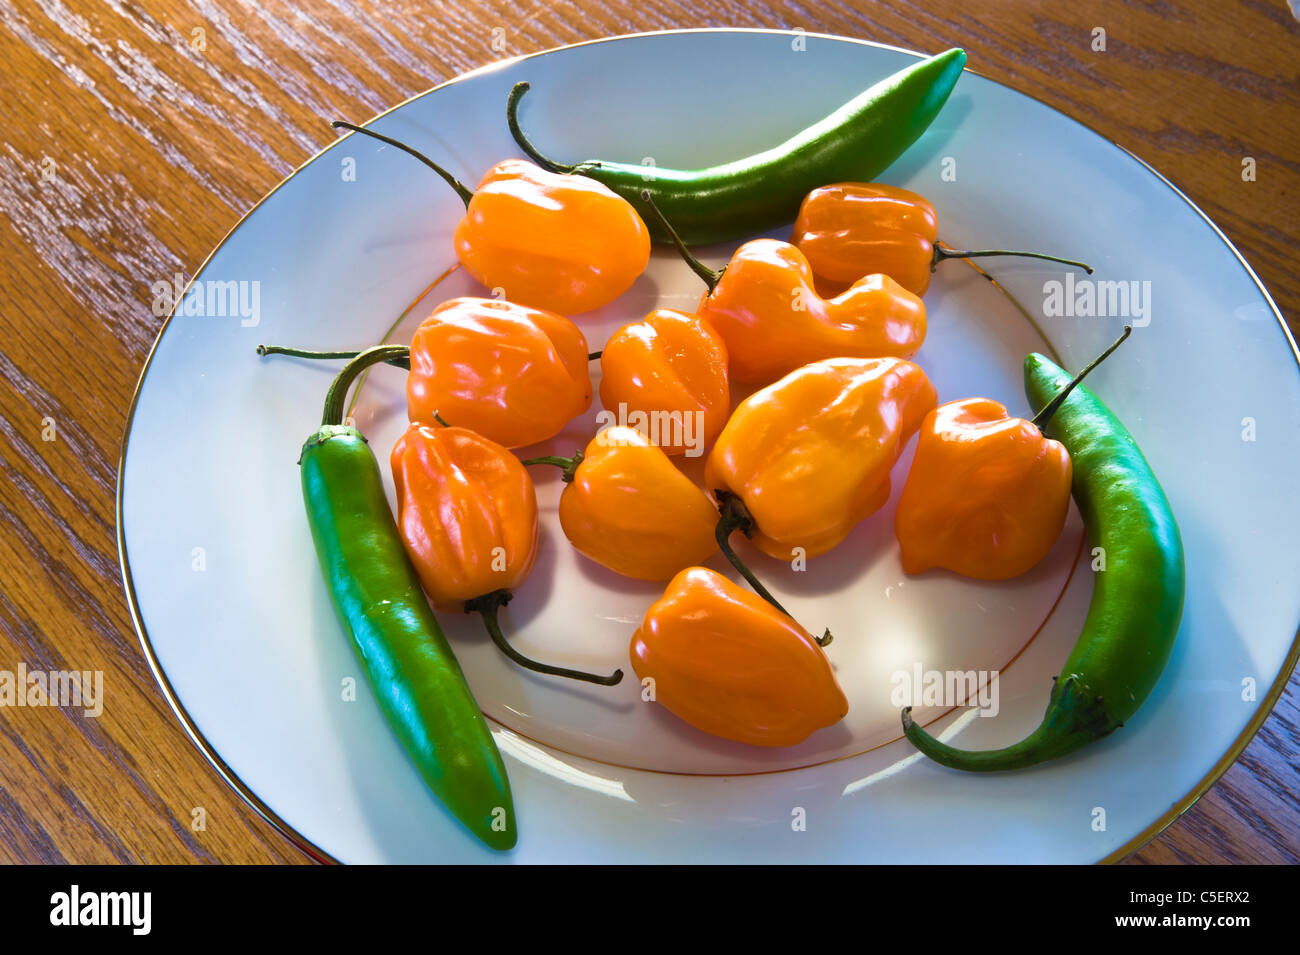 These are some of the hottest peppers in the world! Stock Photo